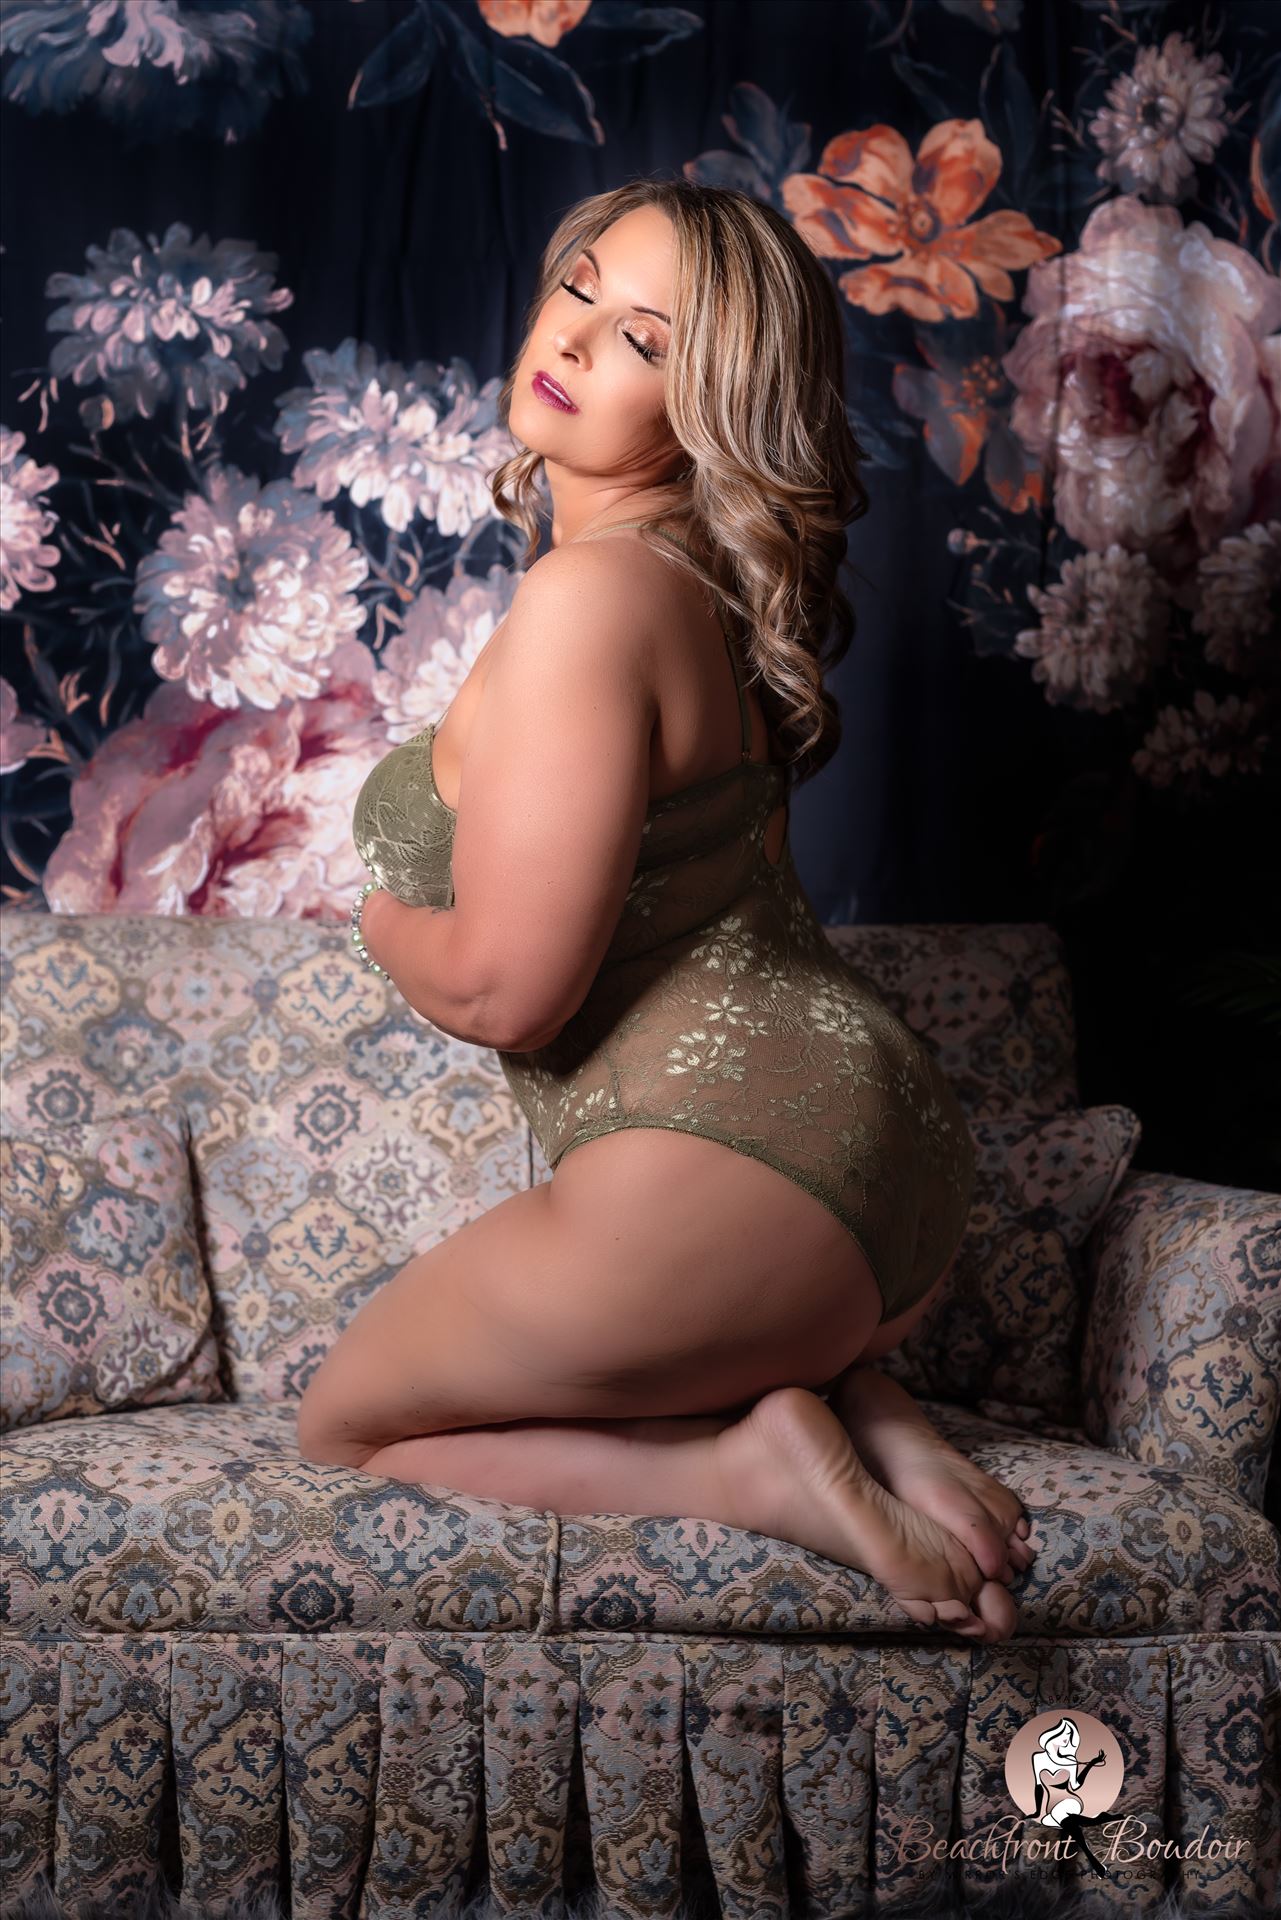 Port-2373.JPG Beachfront Boudoir by Mirror's Edge Photography is a Boutique Luxury Boudoir Photography Studio located just blocks from the beach in Oceano, California. My mission is to show as many women as possible how beautiful they truly are! by Sarah Williams